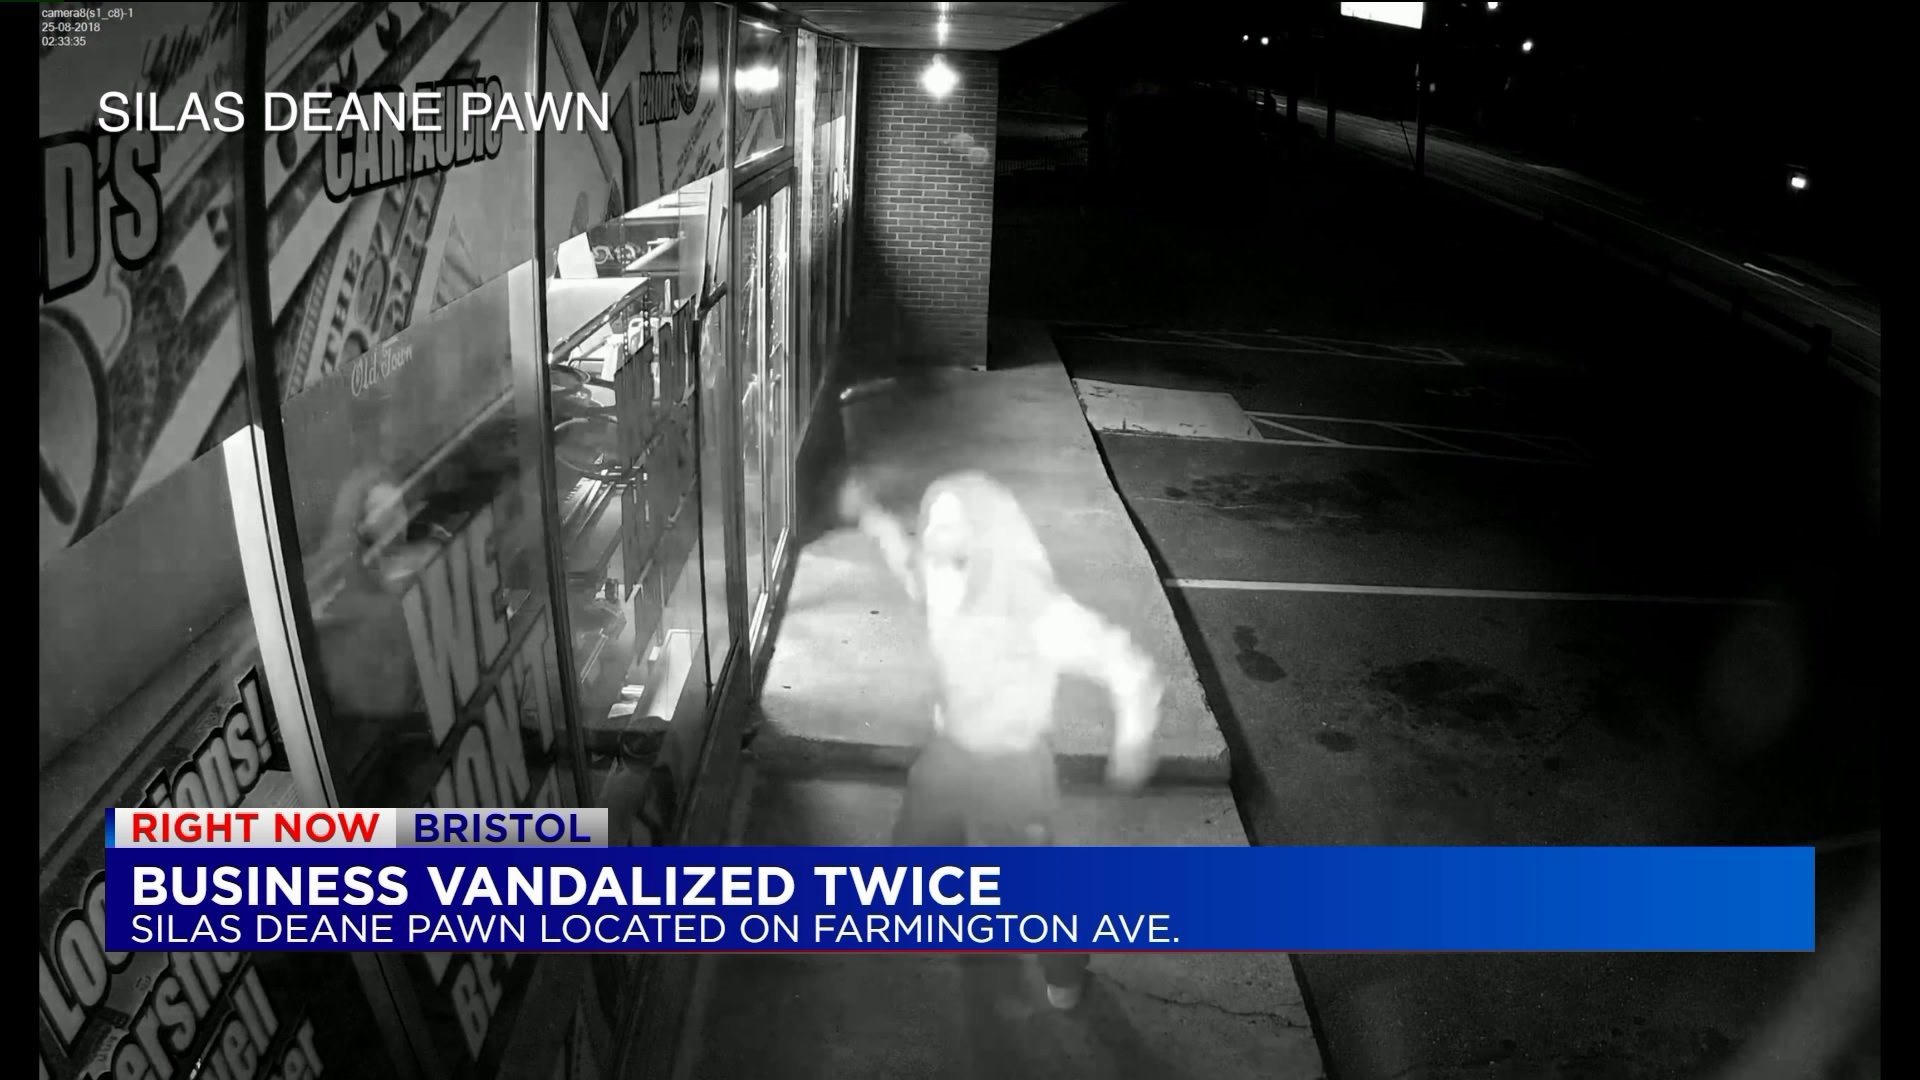 Bristol Pawn Shop Owners Say Their Business Was Vandalized Two Images, Photos, Reviews